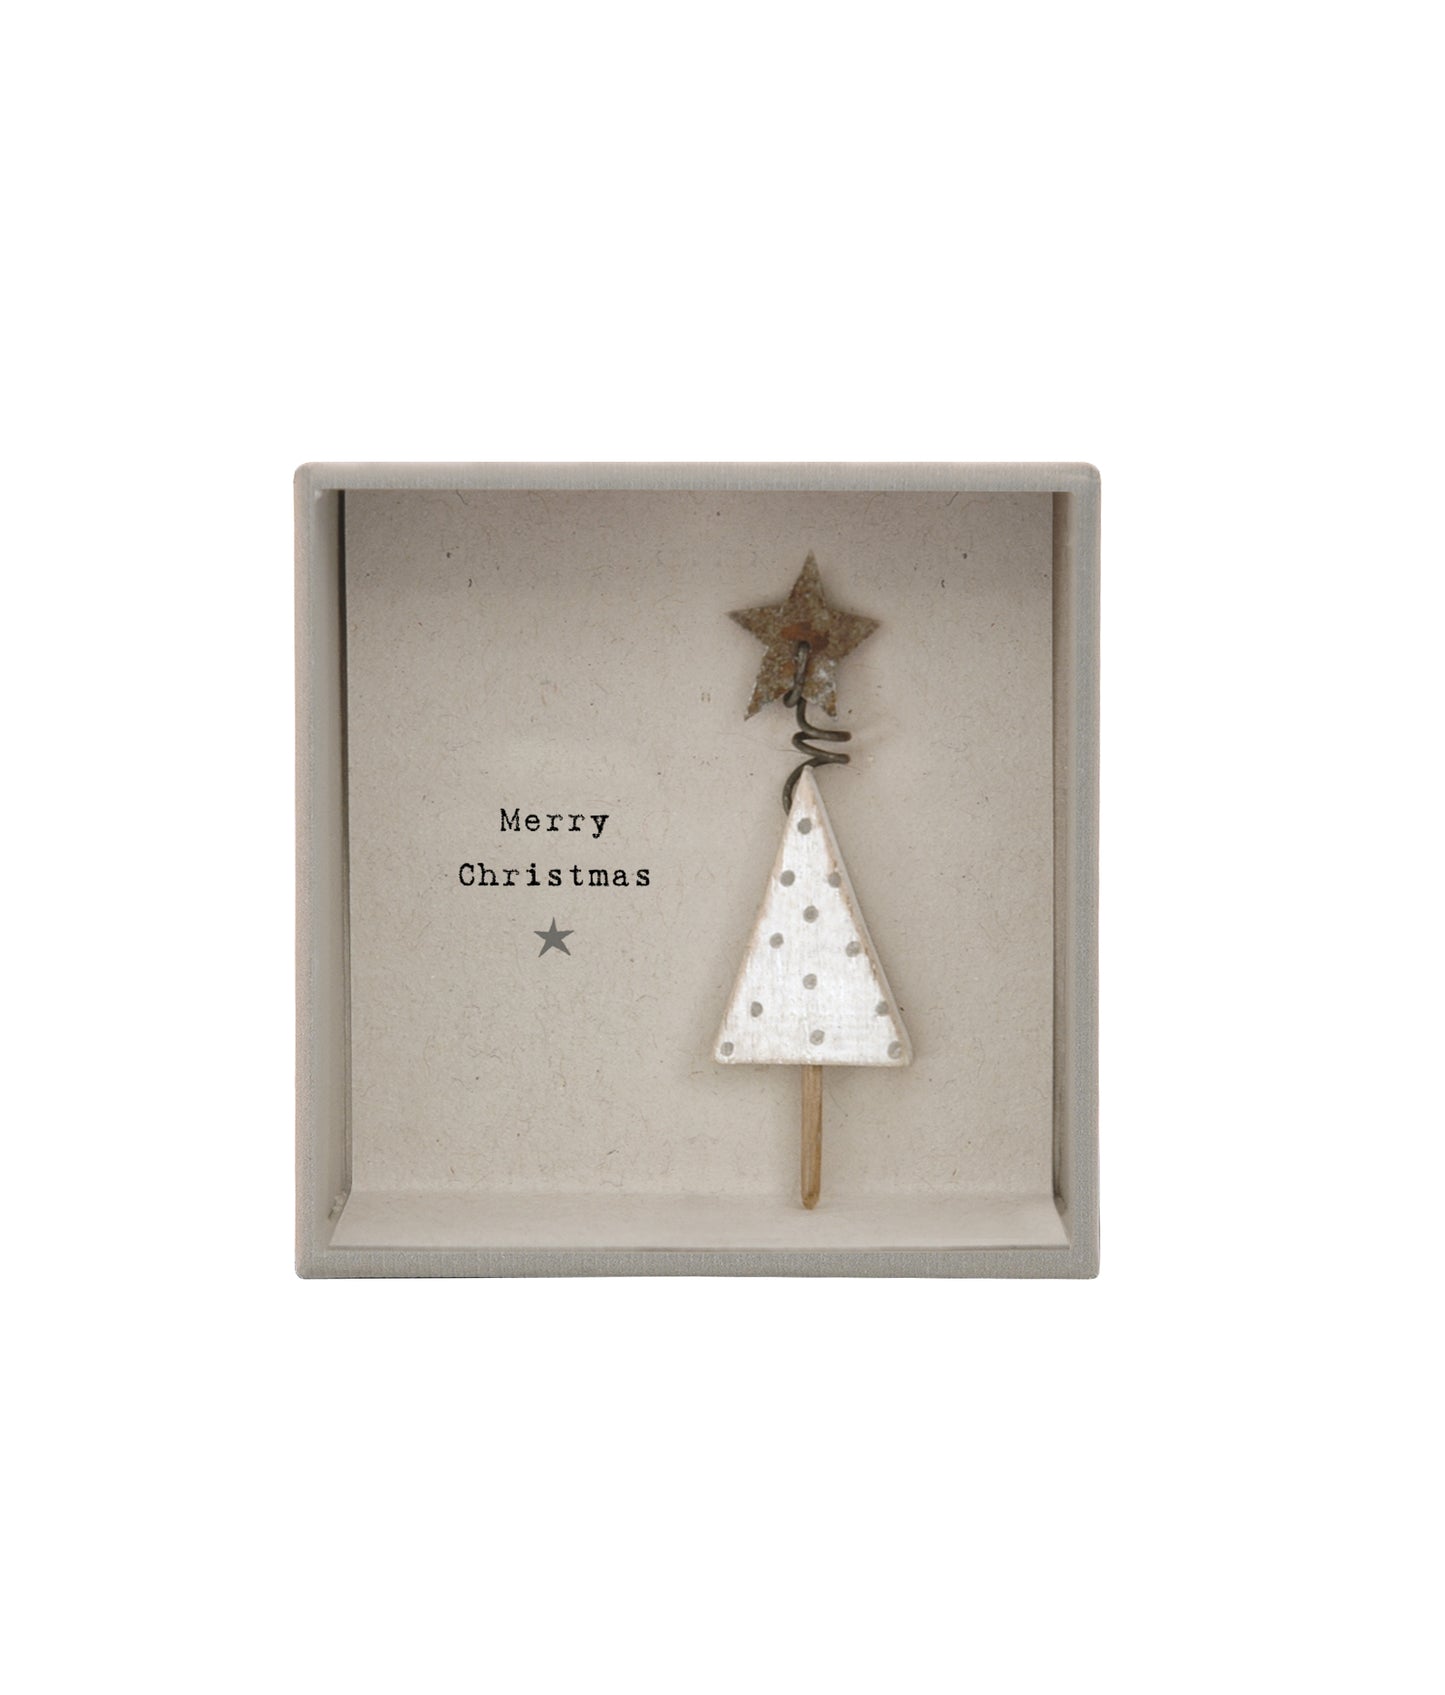 East Of India Merry Christmas Wooden Xmas Tree Ornament In A Box